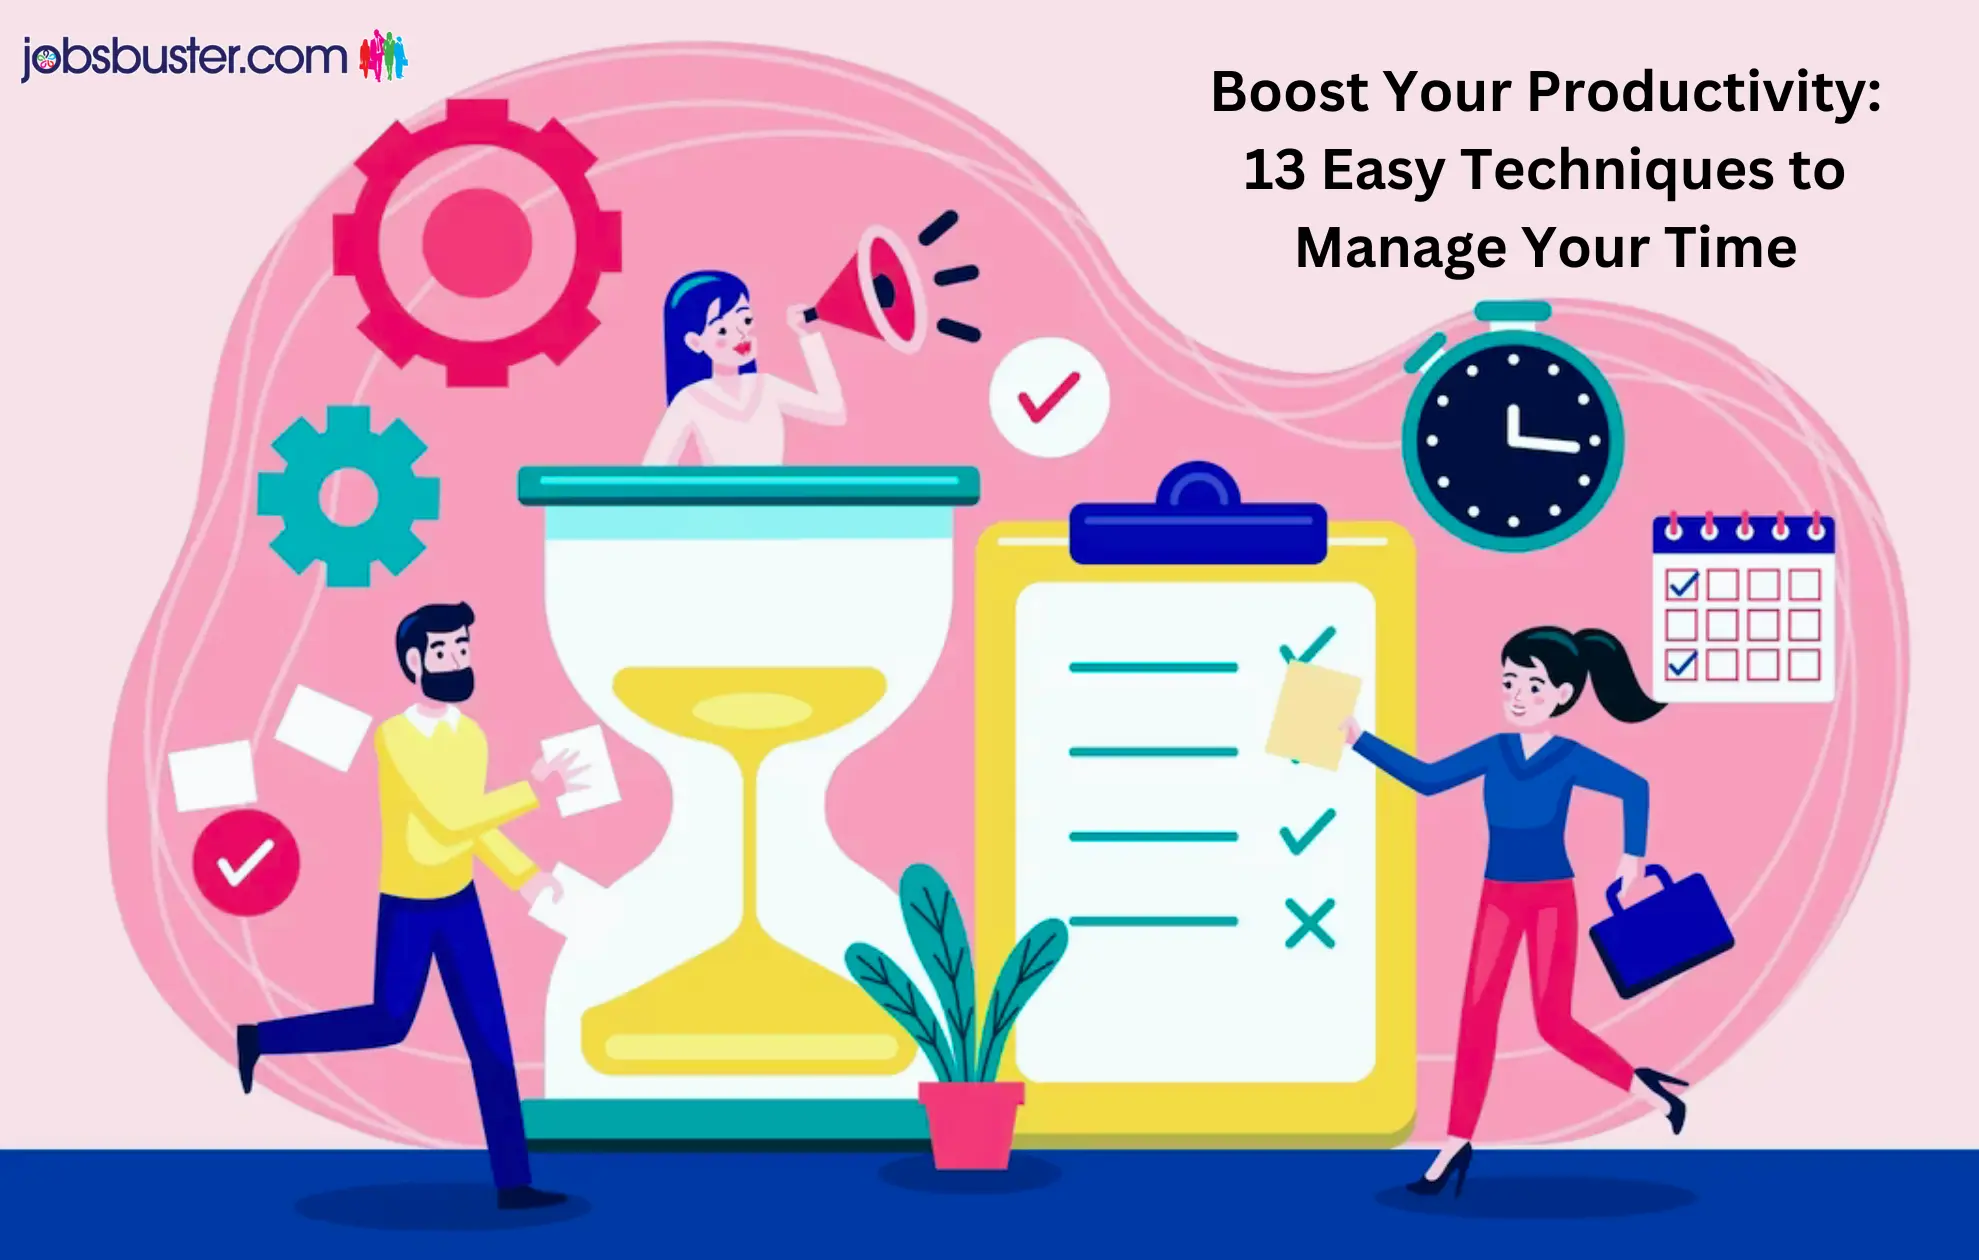 Boost Your Productivity: 13 Easy Techniques to Manage Your Time